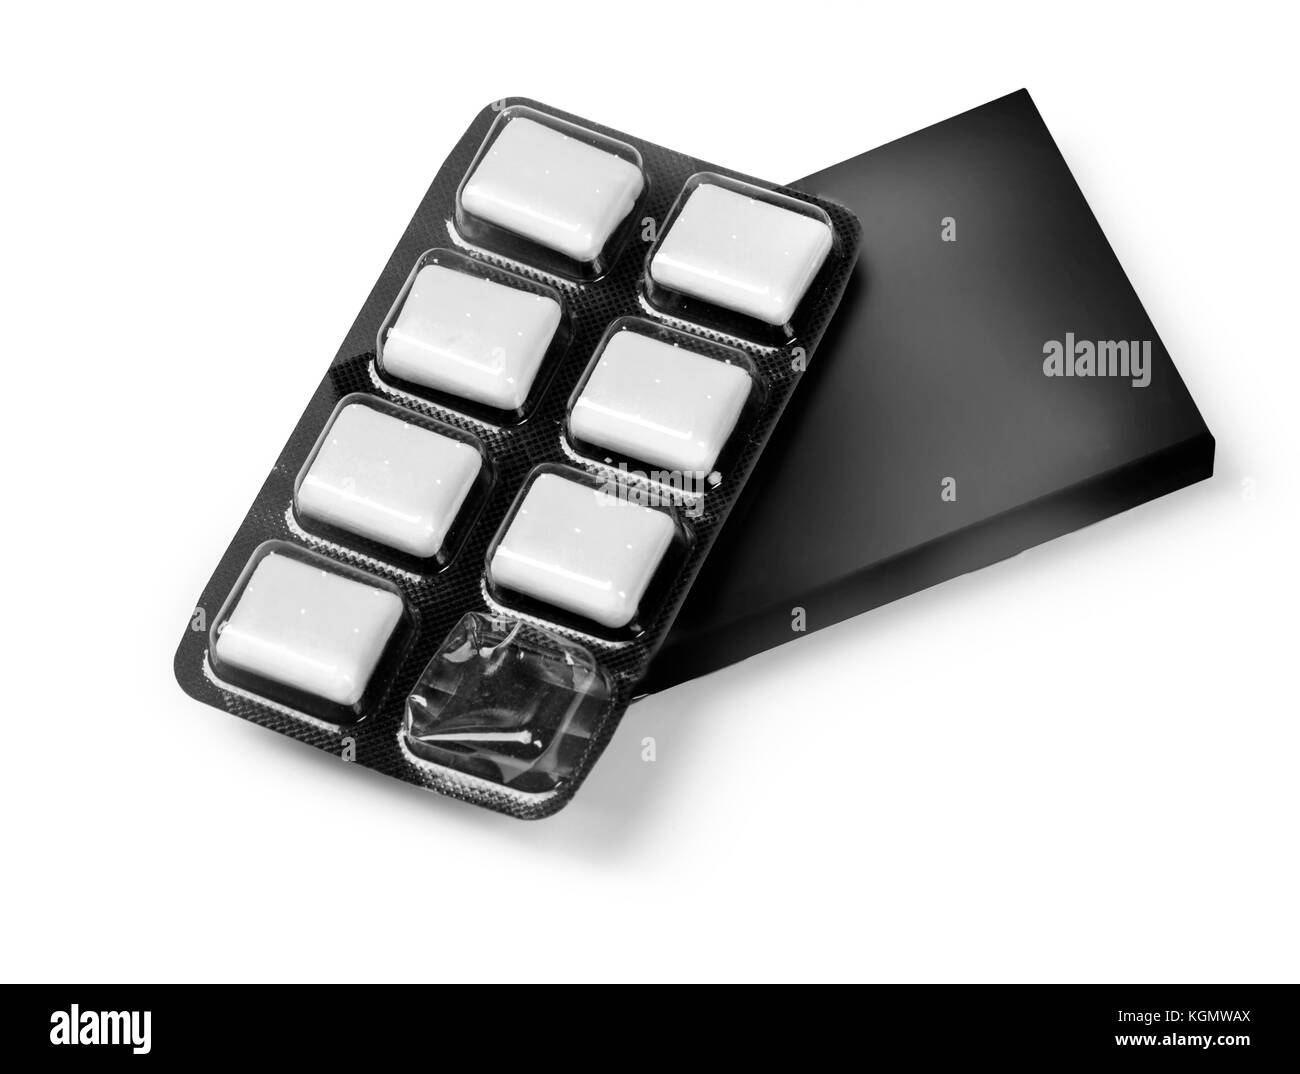 Chewing gum package isolation of the product on a white background with reflections and soldering black color. With clipping path Stock Photo